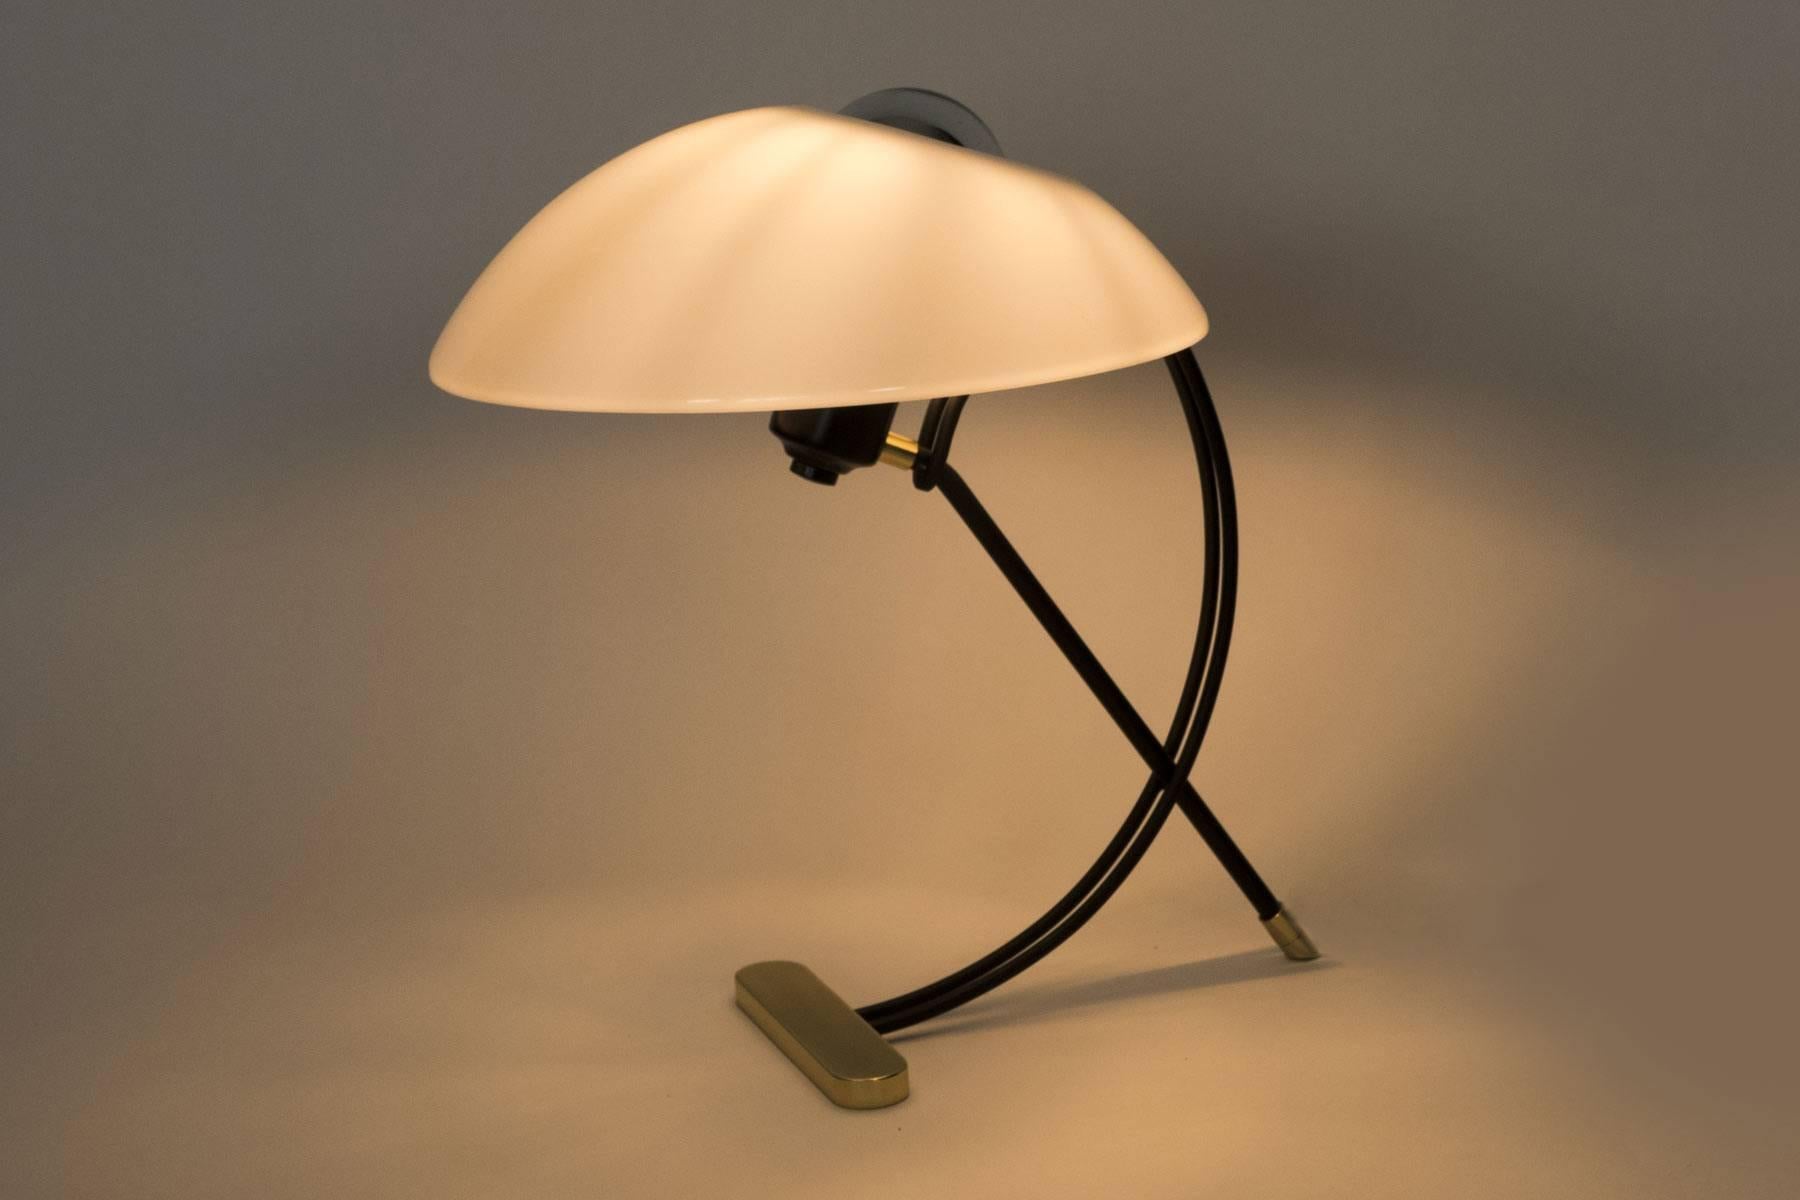 This stylish table lamp is a nice blend of the basic midcentury elements, brass,
acrylic and black enamel. This midcentury inspired lamp provides a beautiful light. The details of the frame add to the elegance. Light uses on medium based bulb.